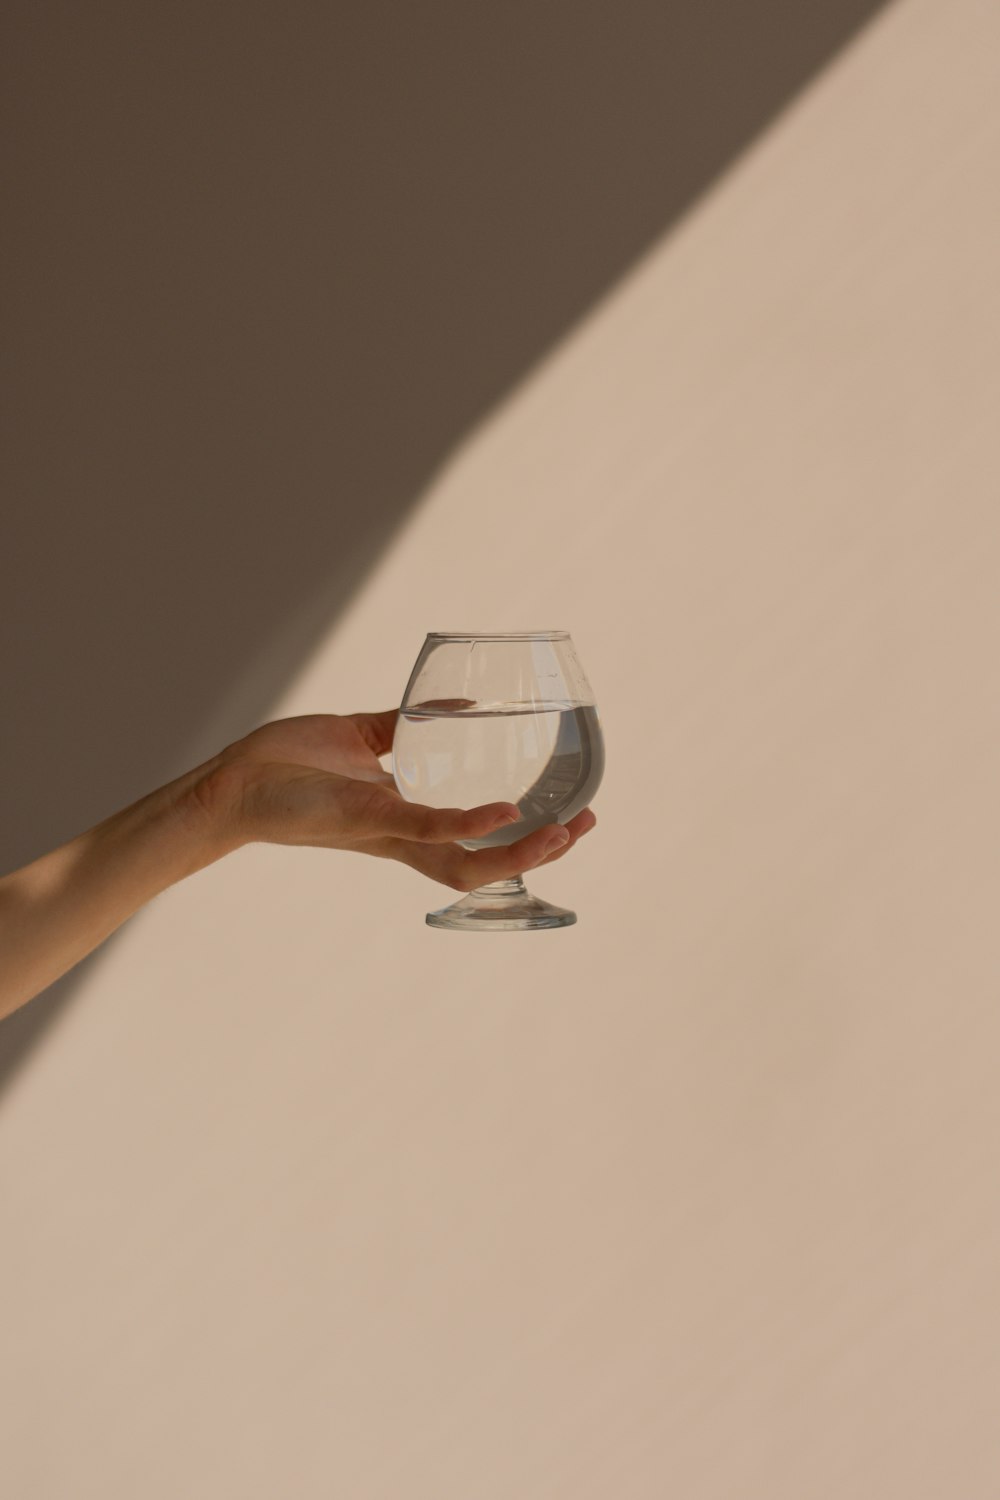 person holding clear wine glass